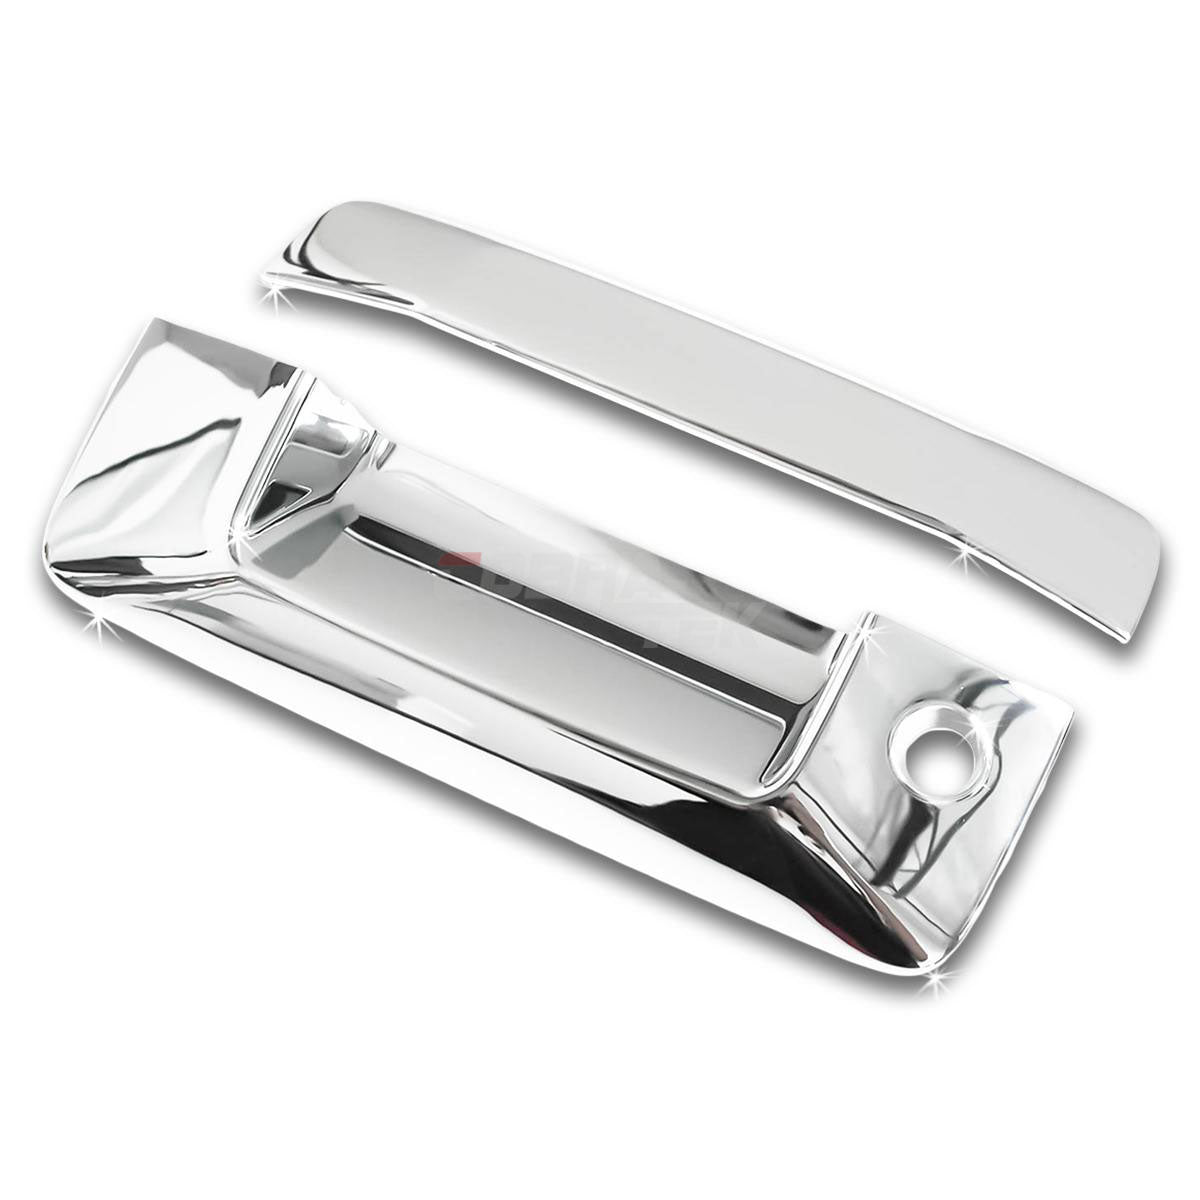 2014-2019 Chevy Silverado 2014-2021 Colorado | 2014-2017 GMC Sierra 2015-2020 Canyon  -  Chrome Tailgate Handle Cover (With Keyhole | Without Camera Cutout)